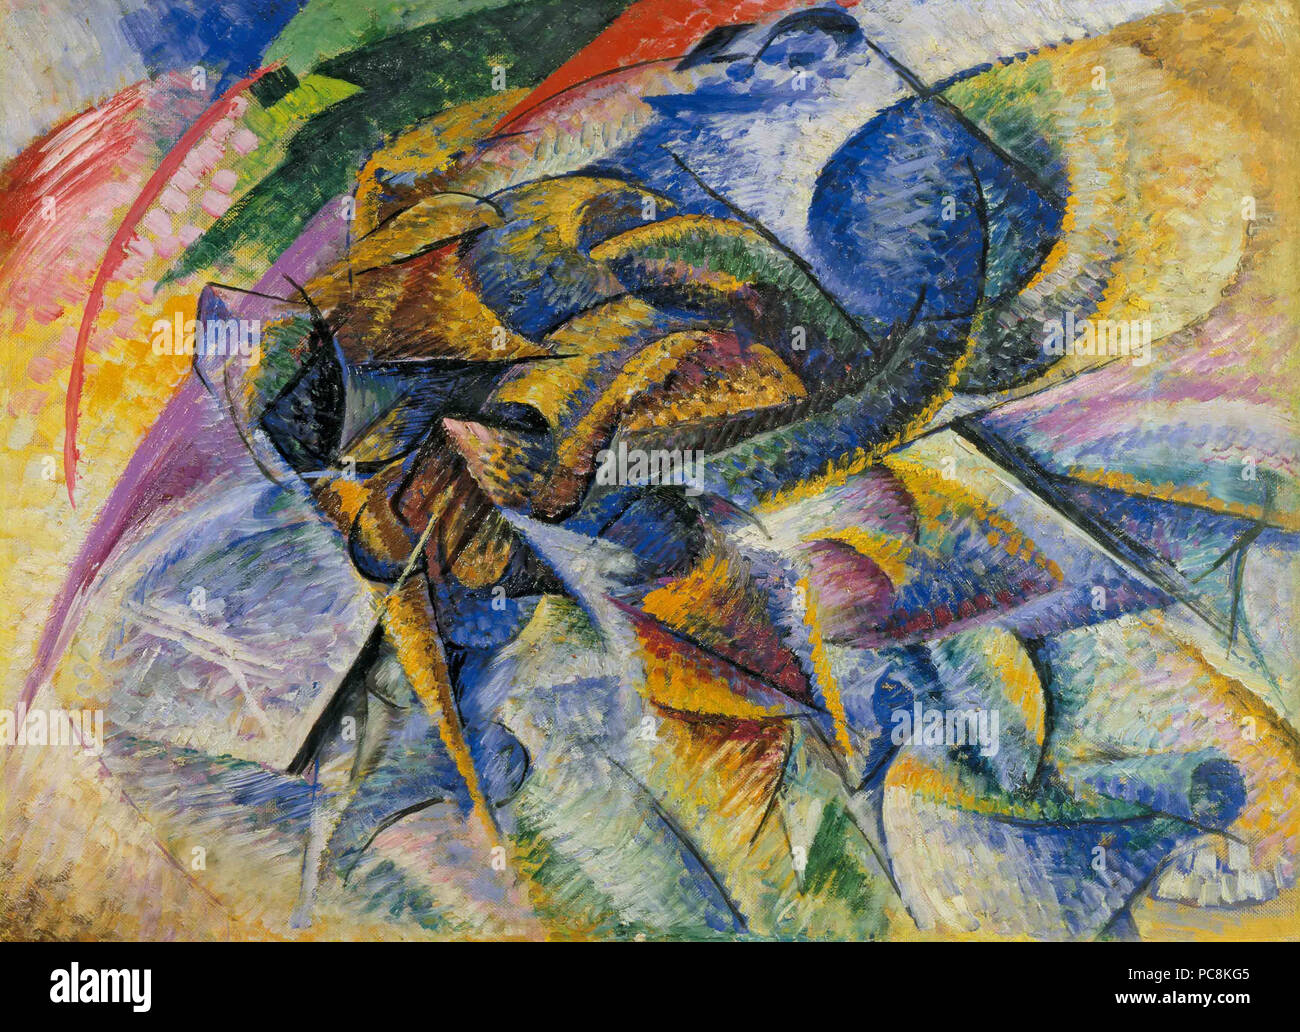 90 Umberto Boccioni, 1913, Dynamism of a Cyclist (Dinamismo di un ciclista), oil on canvas, 70 x 95 cm, Gianni Mattioli Collection, on long-term loan to the Peggy Guggenheim Collection, Venice Stock Photo